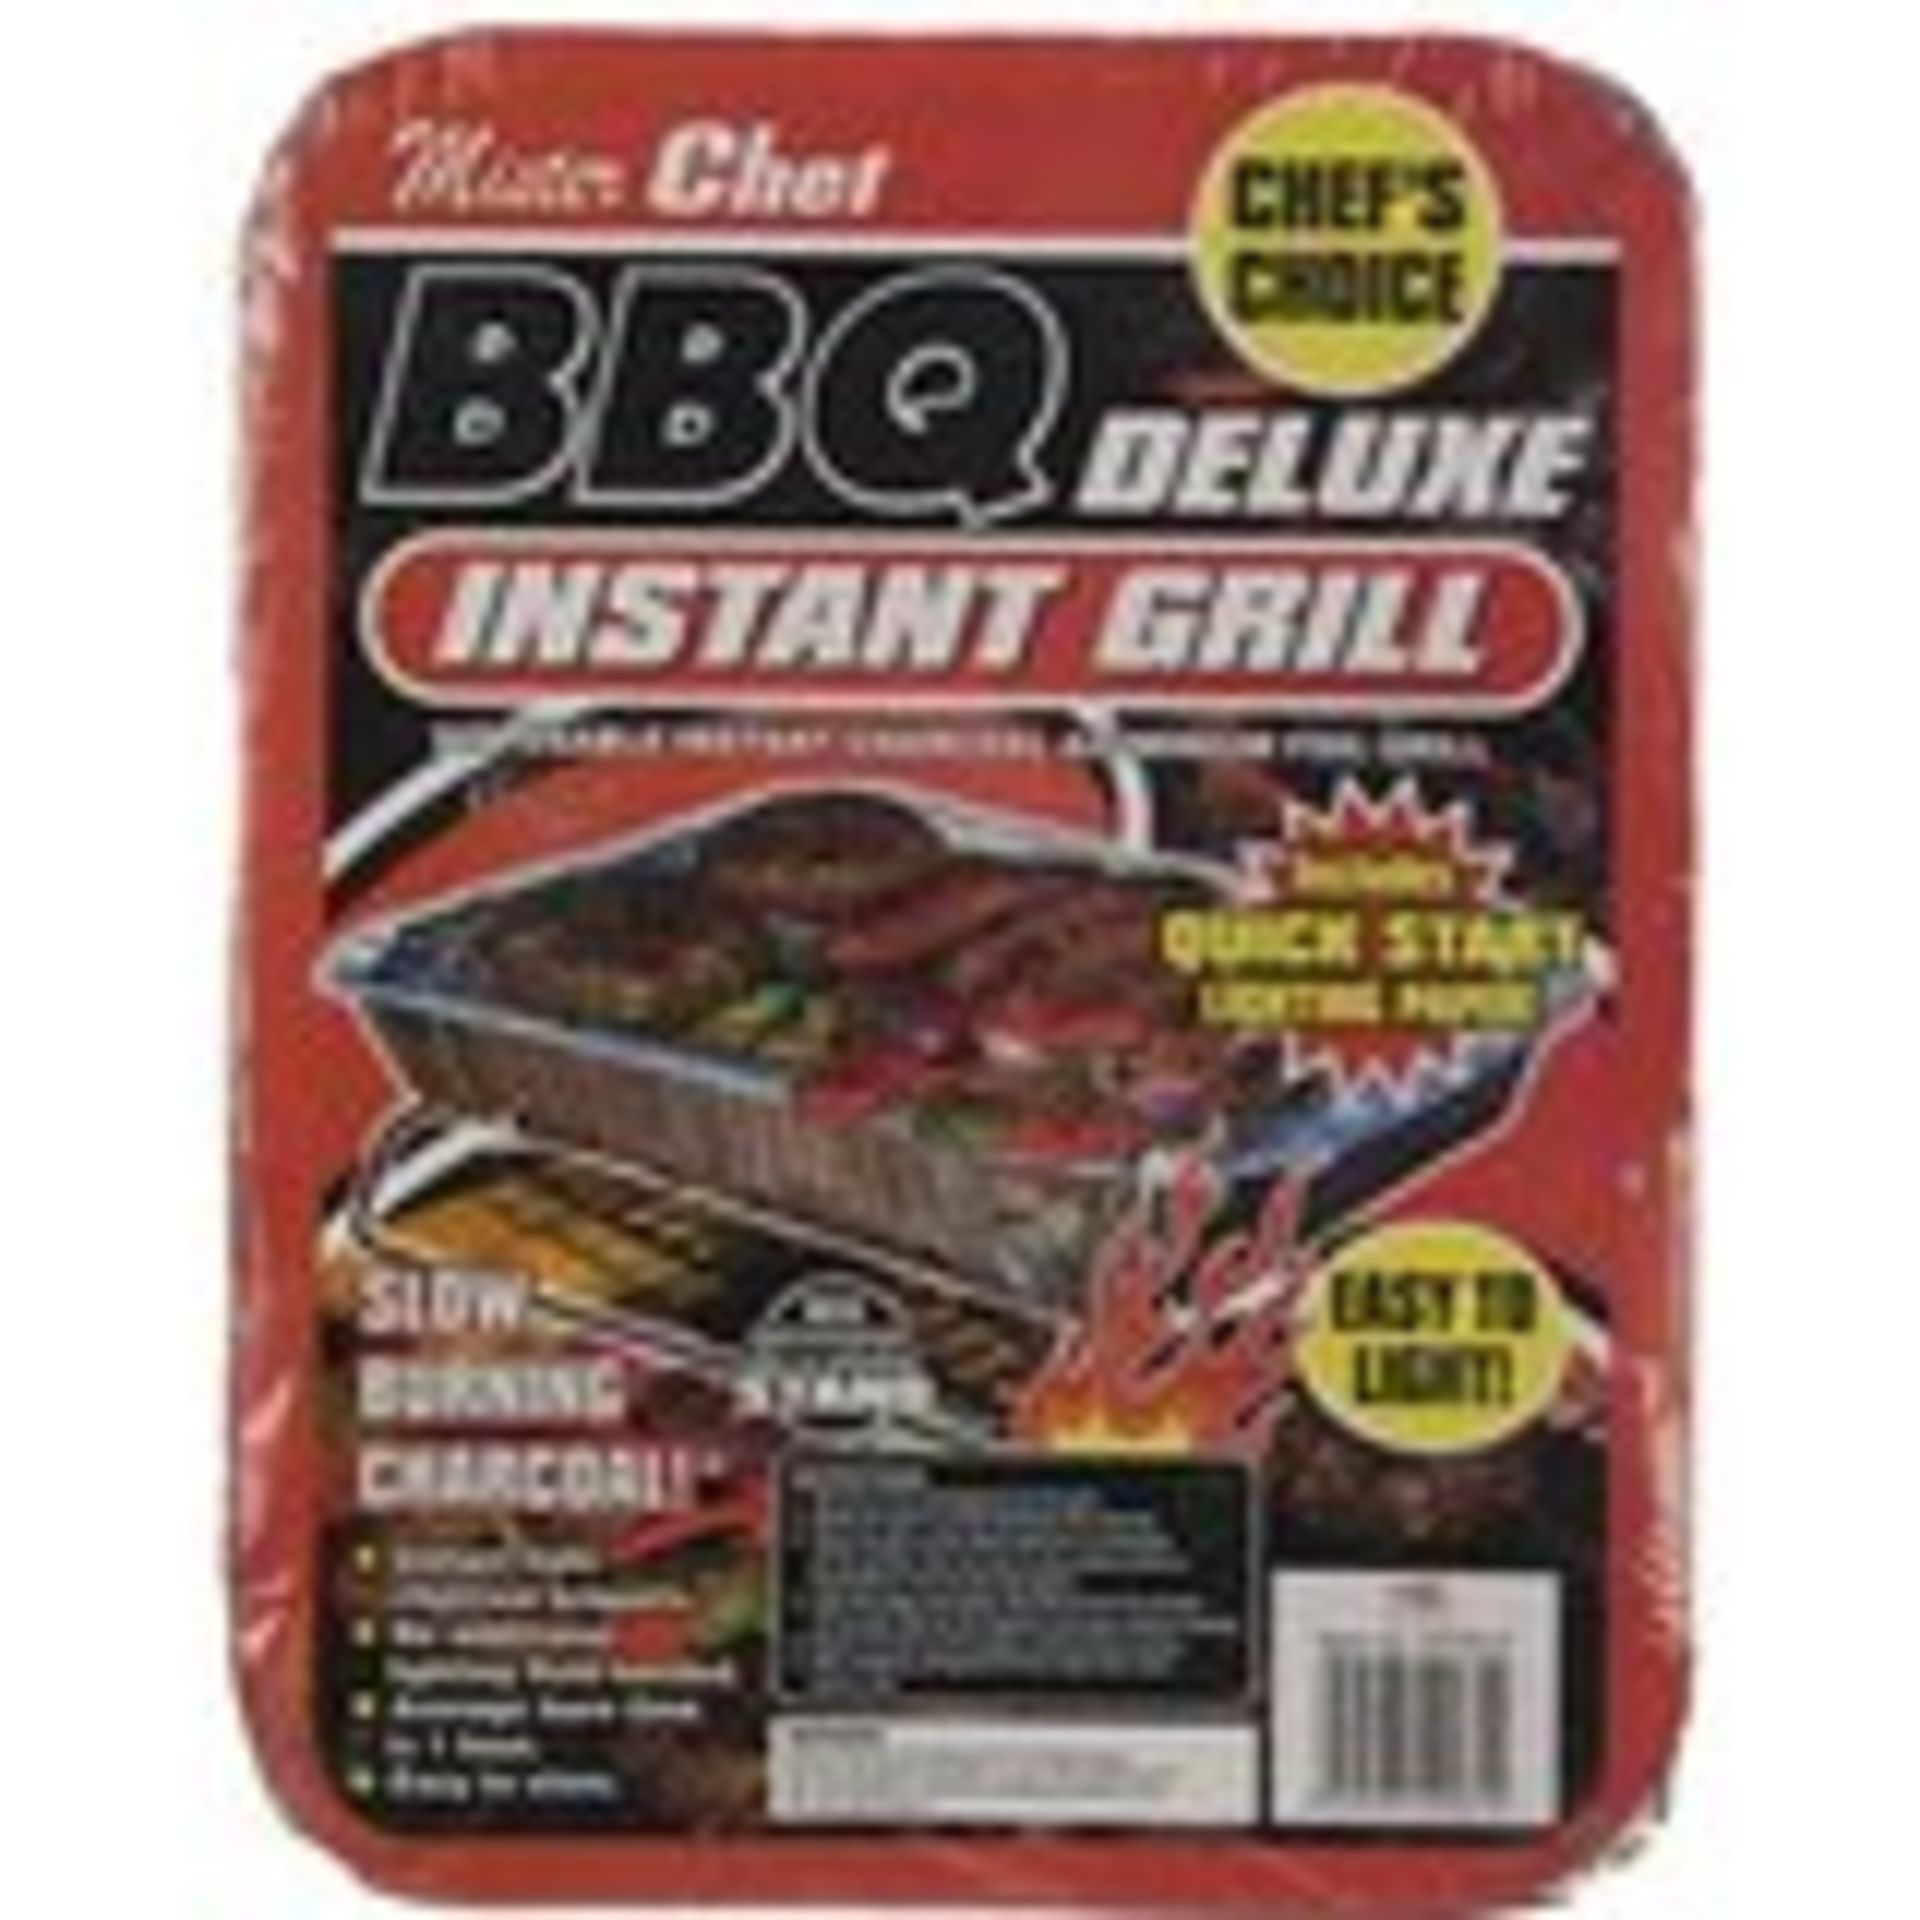 V *TRADE QTY* Brand New Jumbo Charcoal Instant BBQ In Foil Tray 48 X 31 X 6cm X 50 YOUR BID PRICE TO